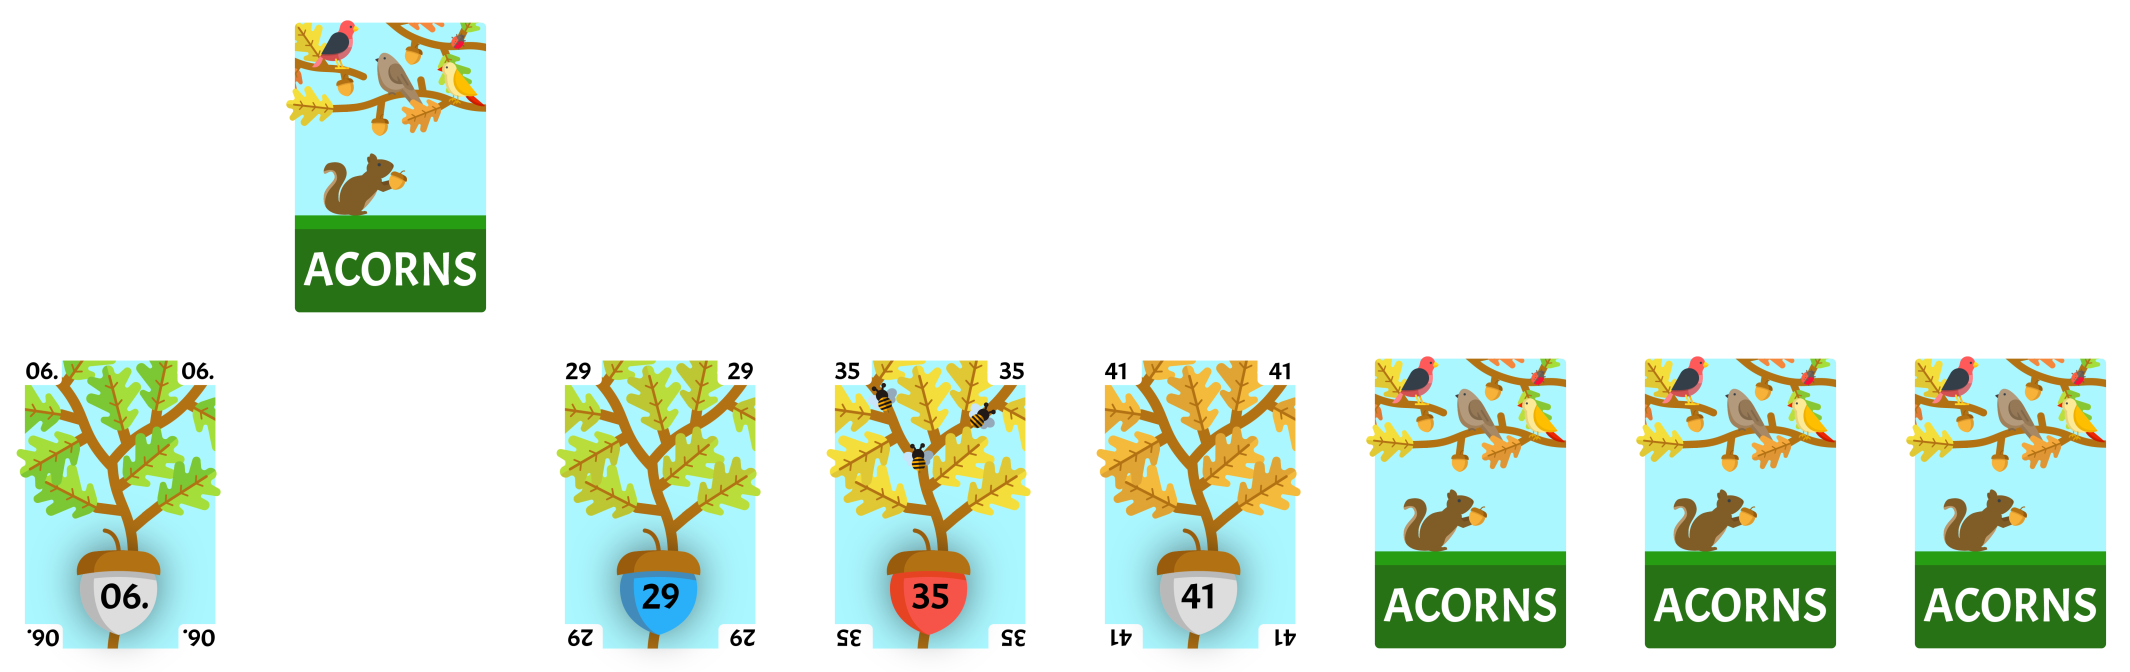 29 swapping positions with left-most card.